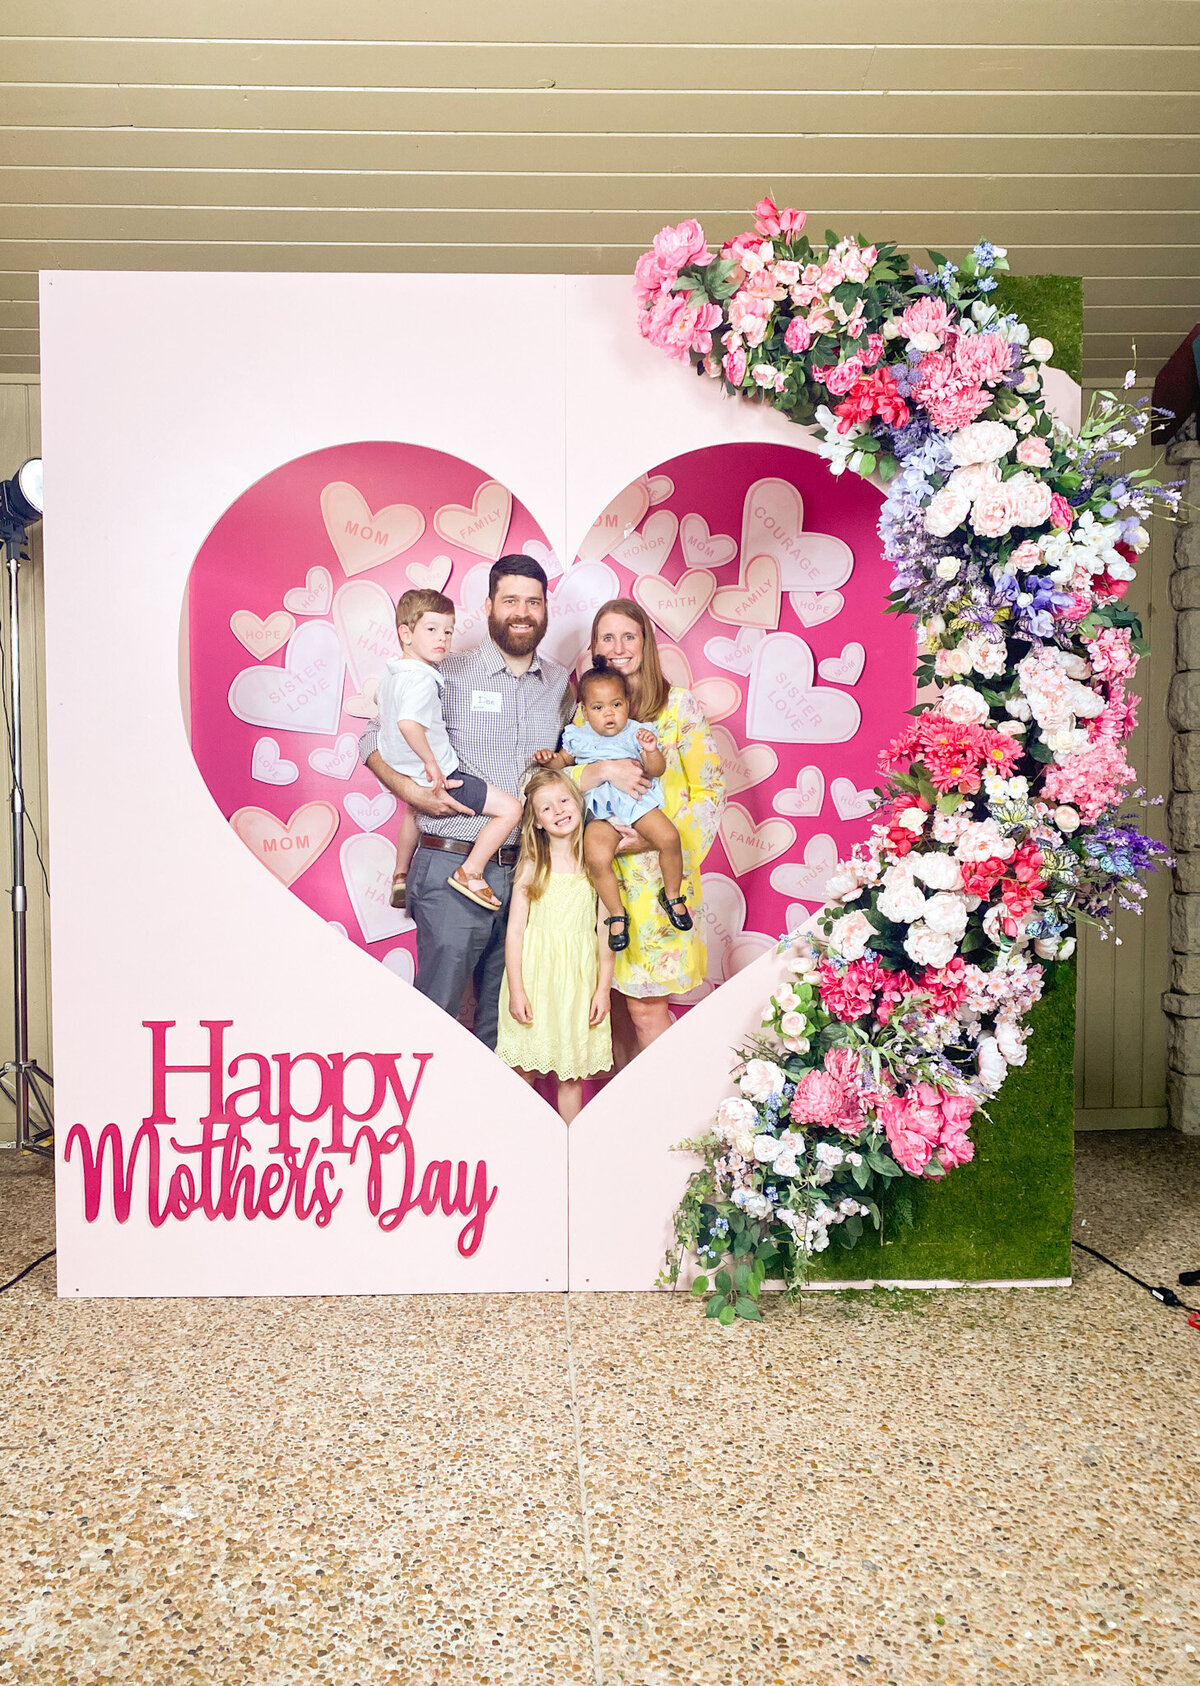 Family posing for a photo in a Happy Mother's Day pink heart shaped photo booth backdrop design with floral arch